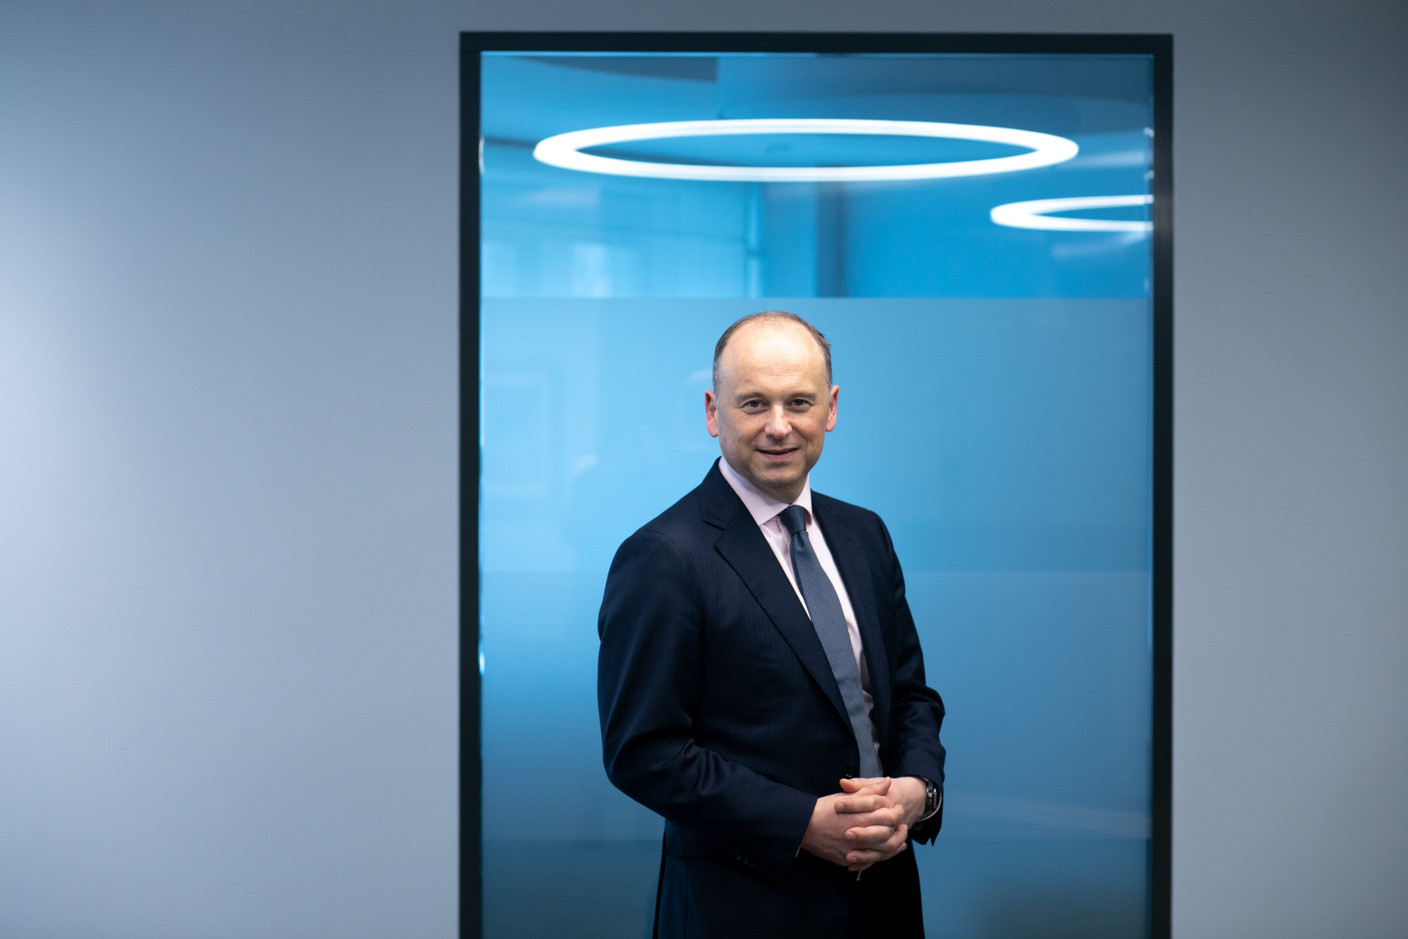 Chris Allen has been group CEO of Quintet Private Bank since 1 July 2022. The bank announced a net profit for the 2022 financial year, reversing several years of losses, on 23 March 2023. Photo: Matic Zorman / Maison Moderne